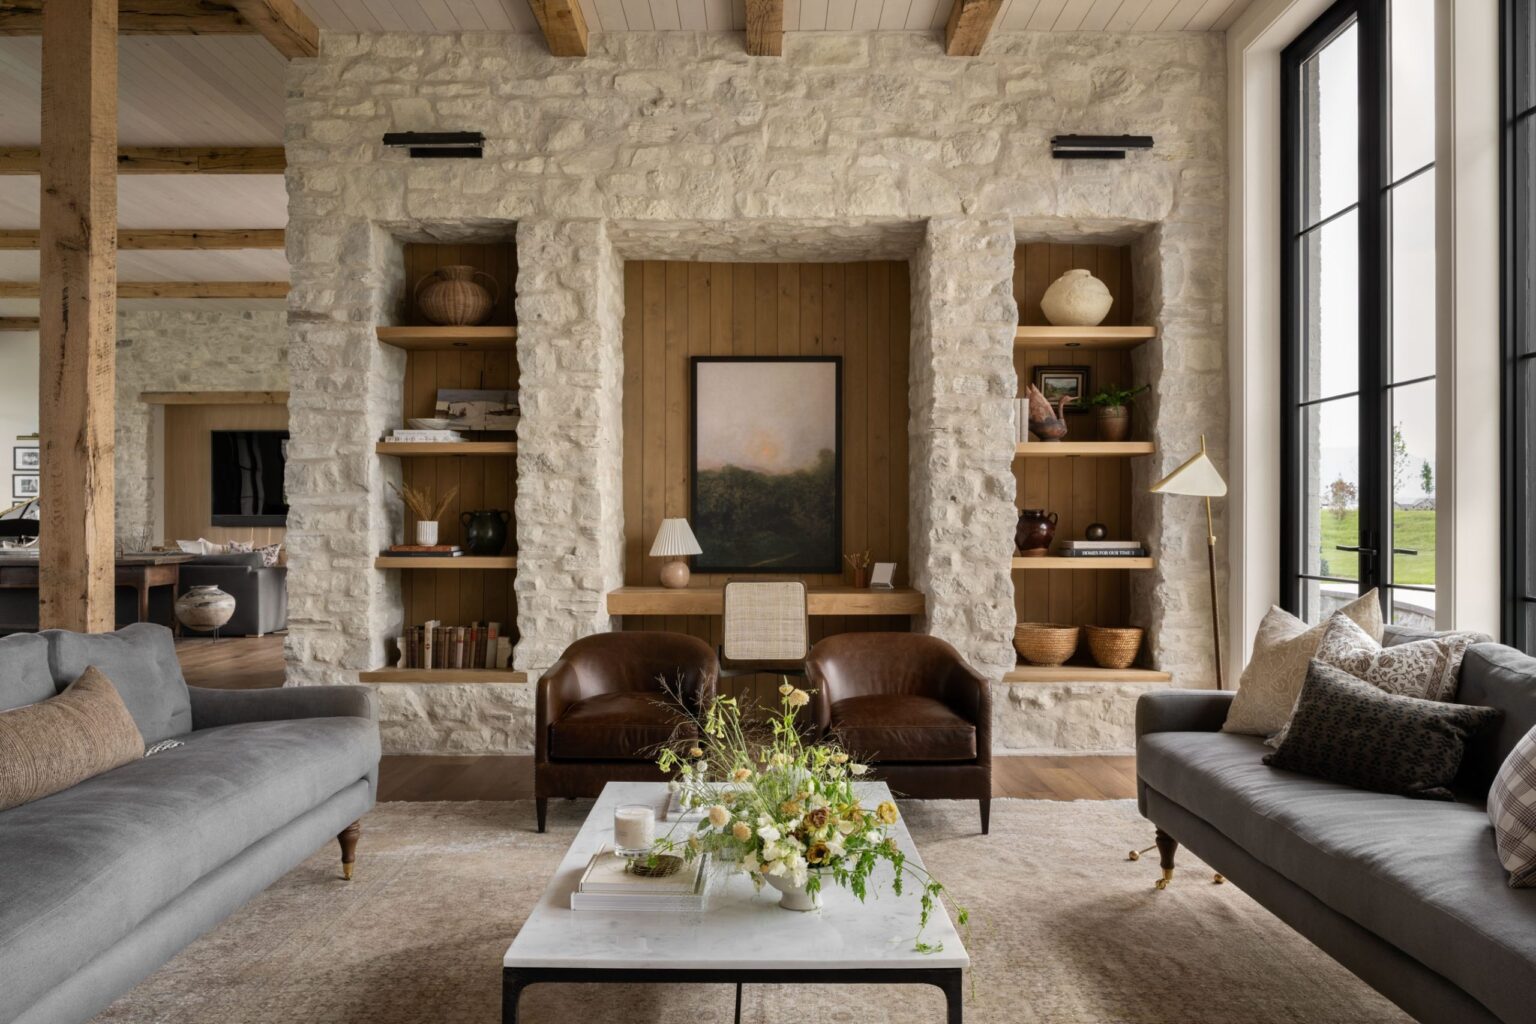 A 20,000 Square Foot Luxury Vacation Home | Lark & Linen